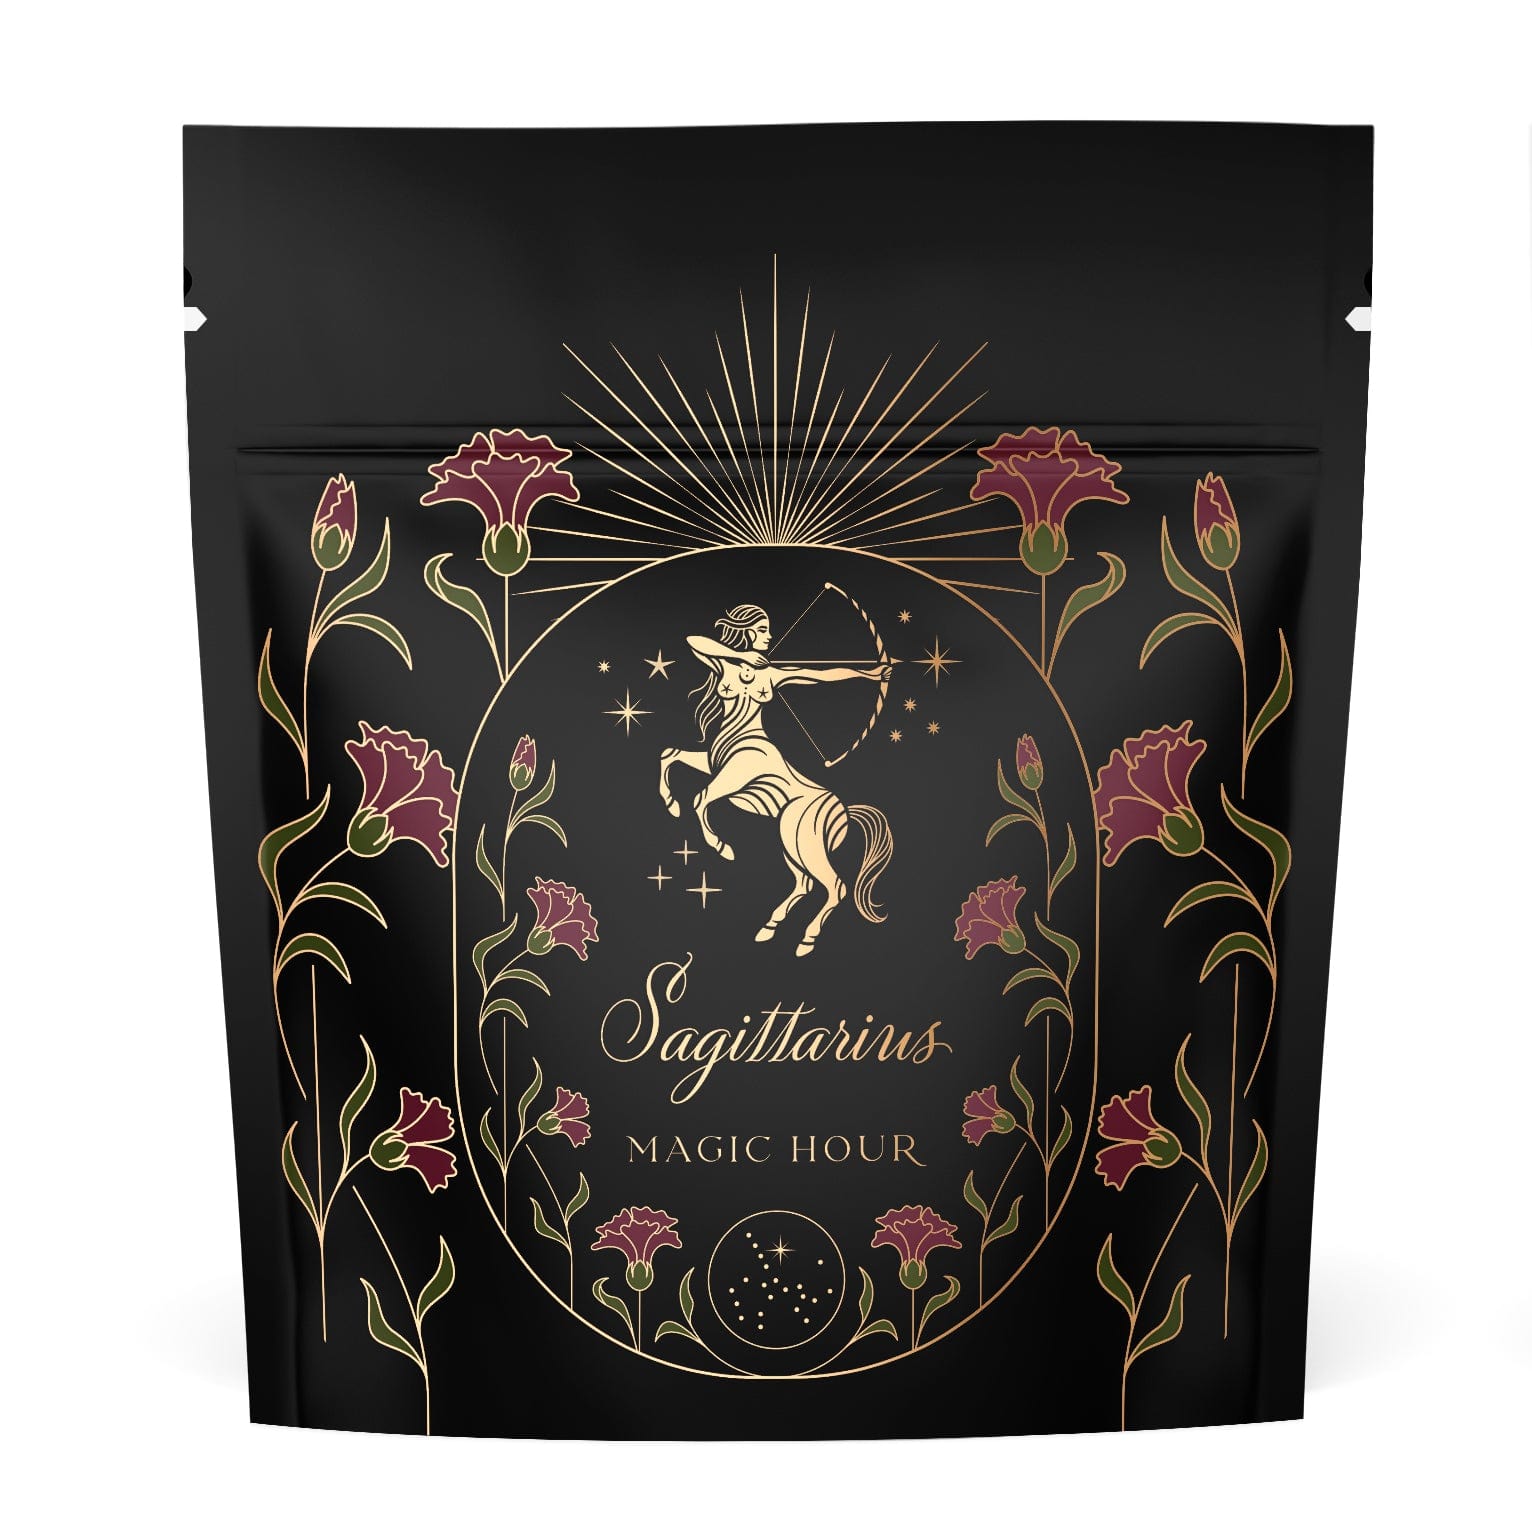 A black, resealable bag features a gold-etched design of a centaur archer, symbolizing Sagittarius, surrounded by red carnations and green leaves. The text "Sagittarius Tea of Good Fortune & Abundance" appears below the centaur, with a celestial motif at the bottom of the design. Enjoy your organic loose leaf tea during this Magic Hour experience.